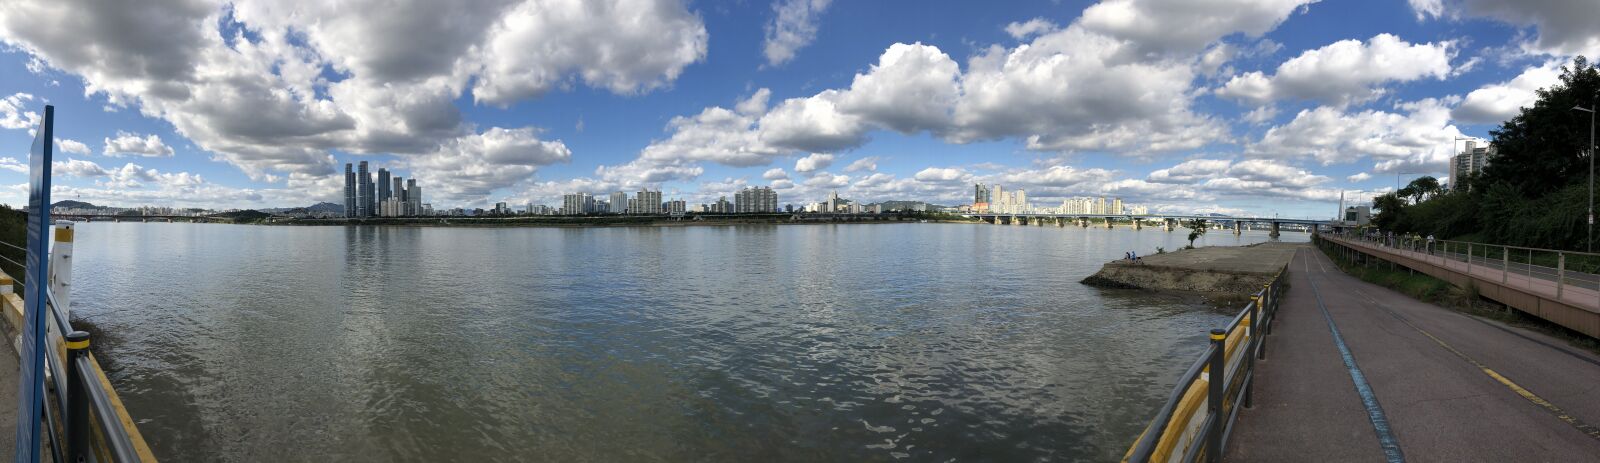 Apple iPhone X + iPhone X back camera 4mm f/1.8 sample photo. River, panorama photography